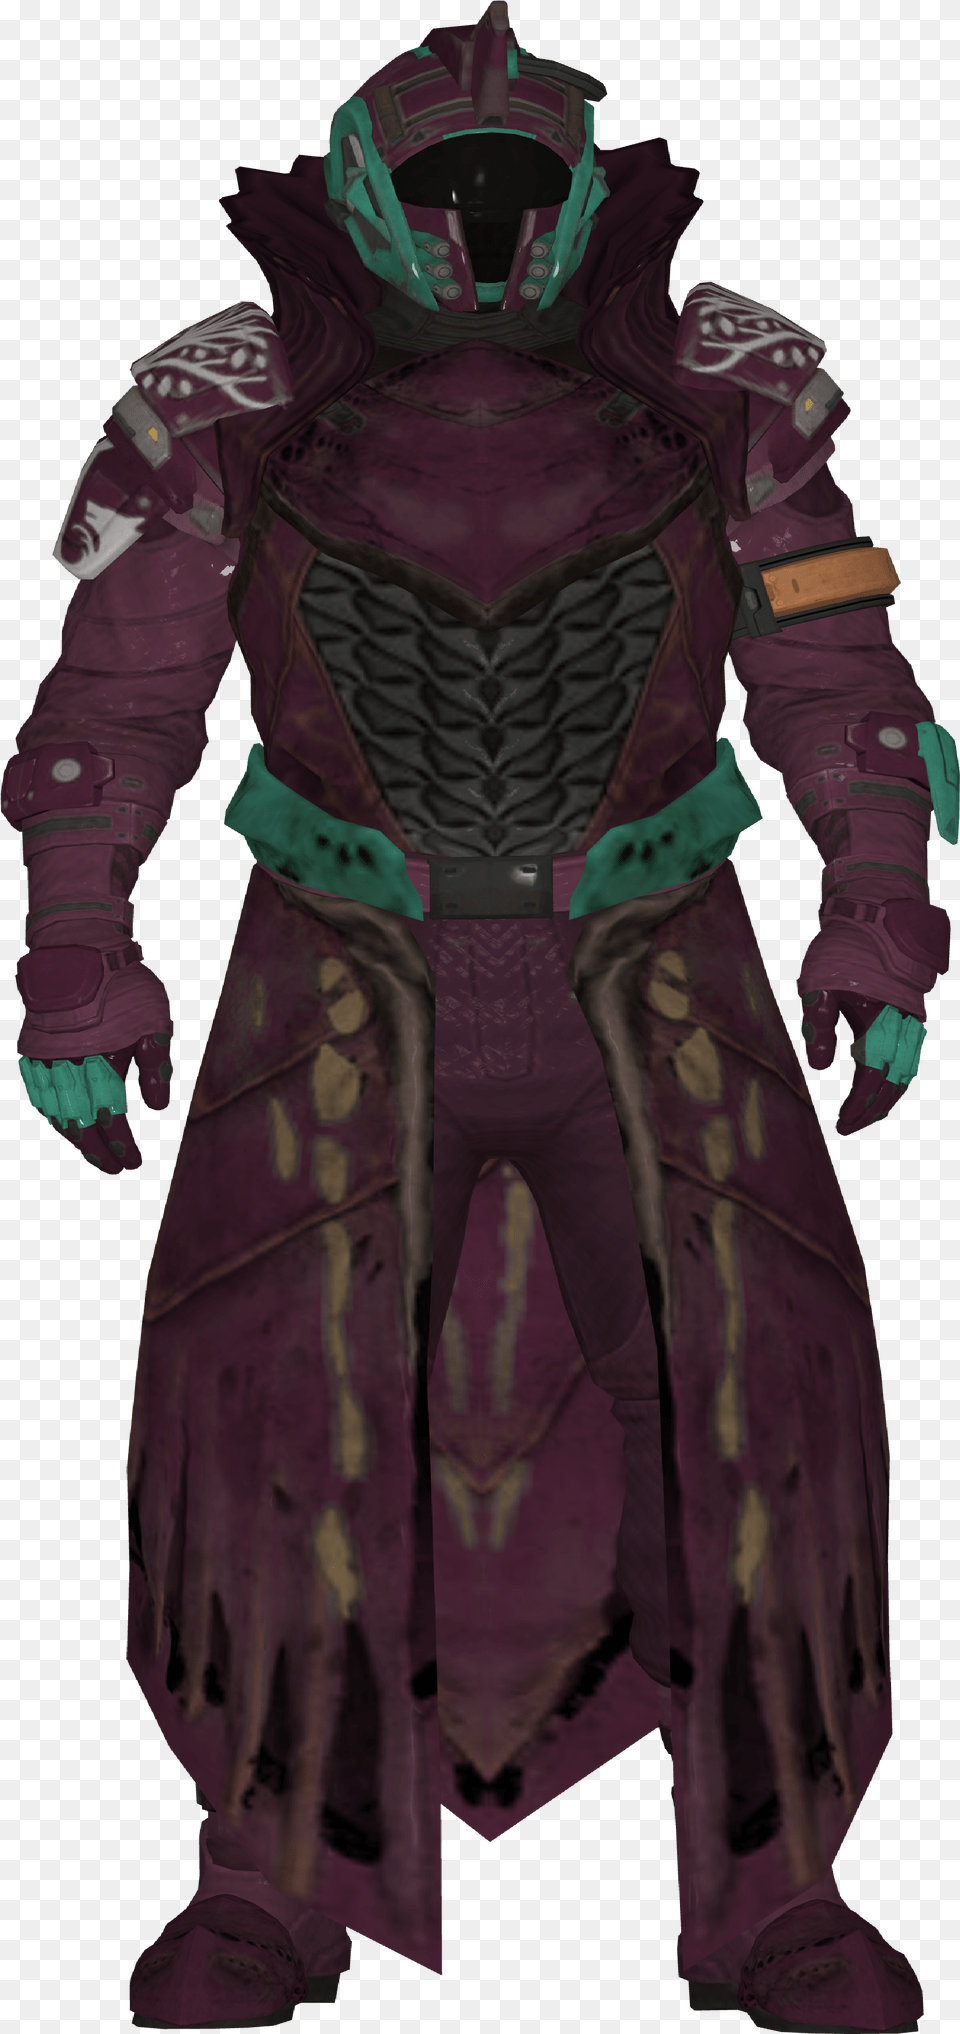 Warlock Dampd4 Wiki Fandom Powered By Wikia Wiki, Clothing, Costume, Person, Coat Png Image